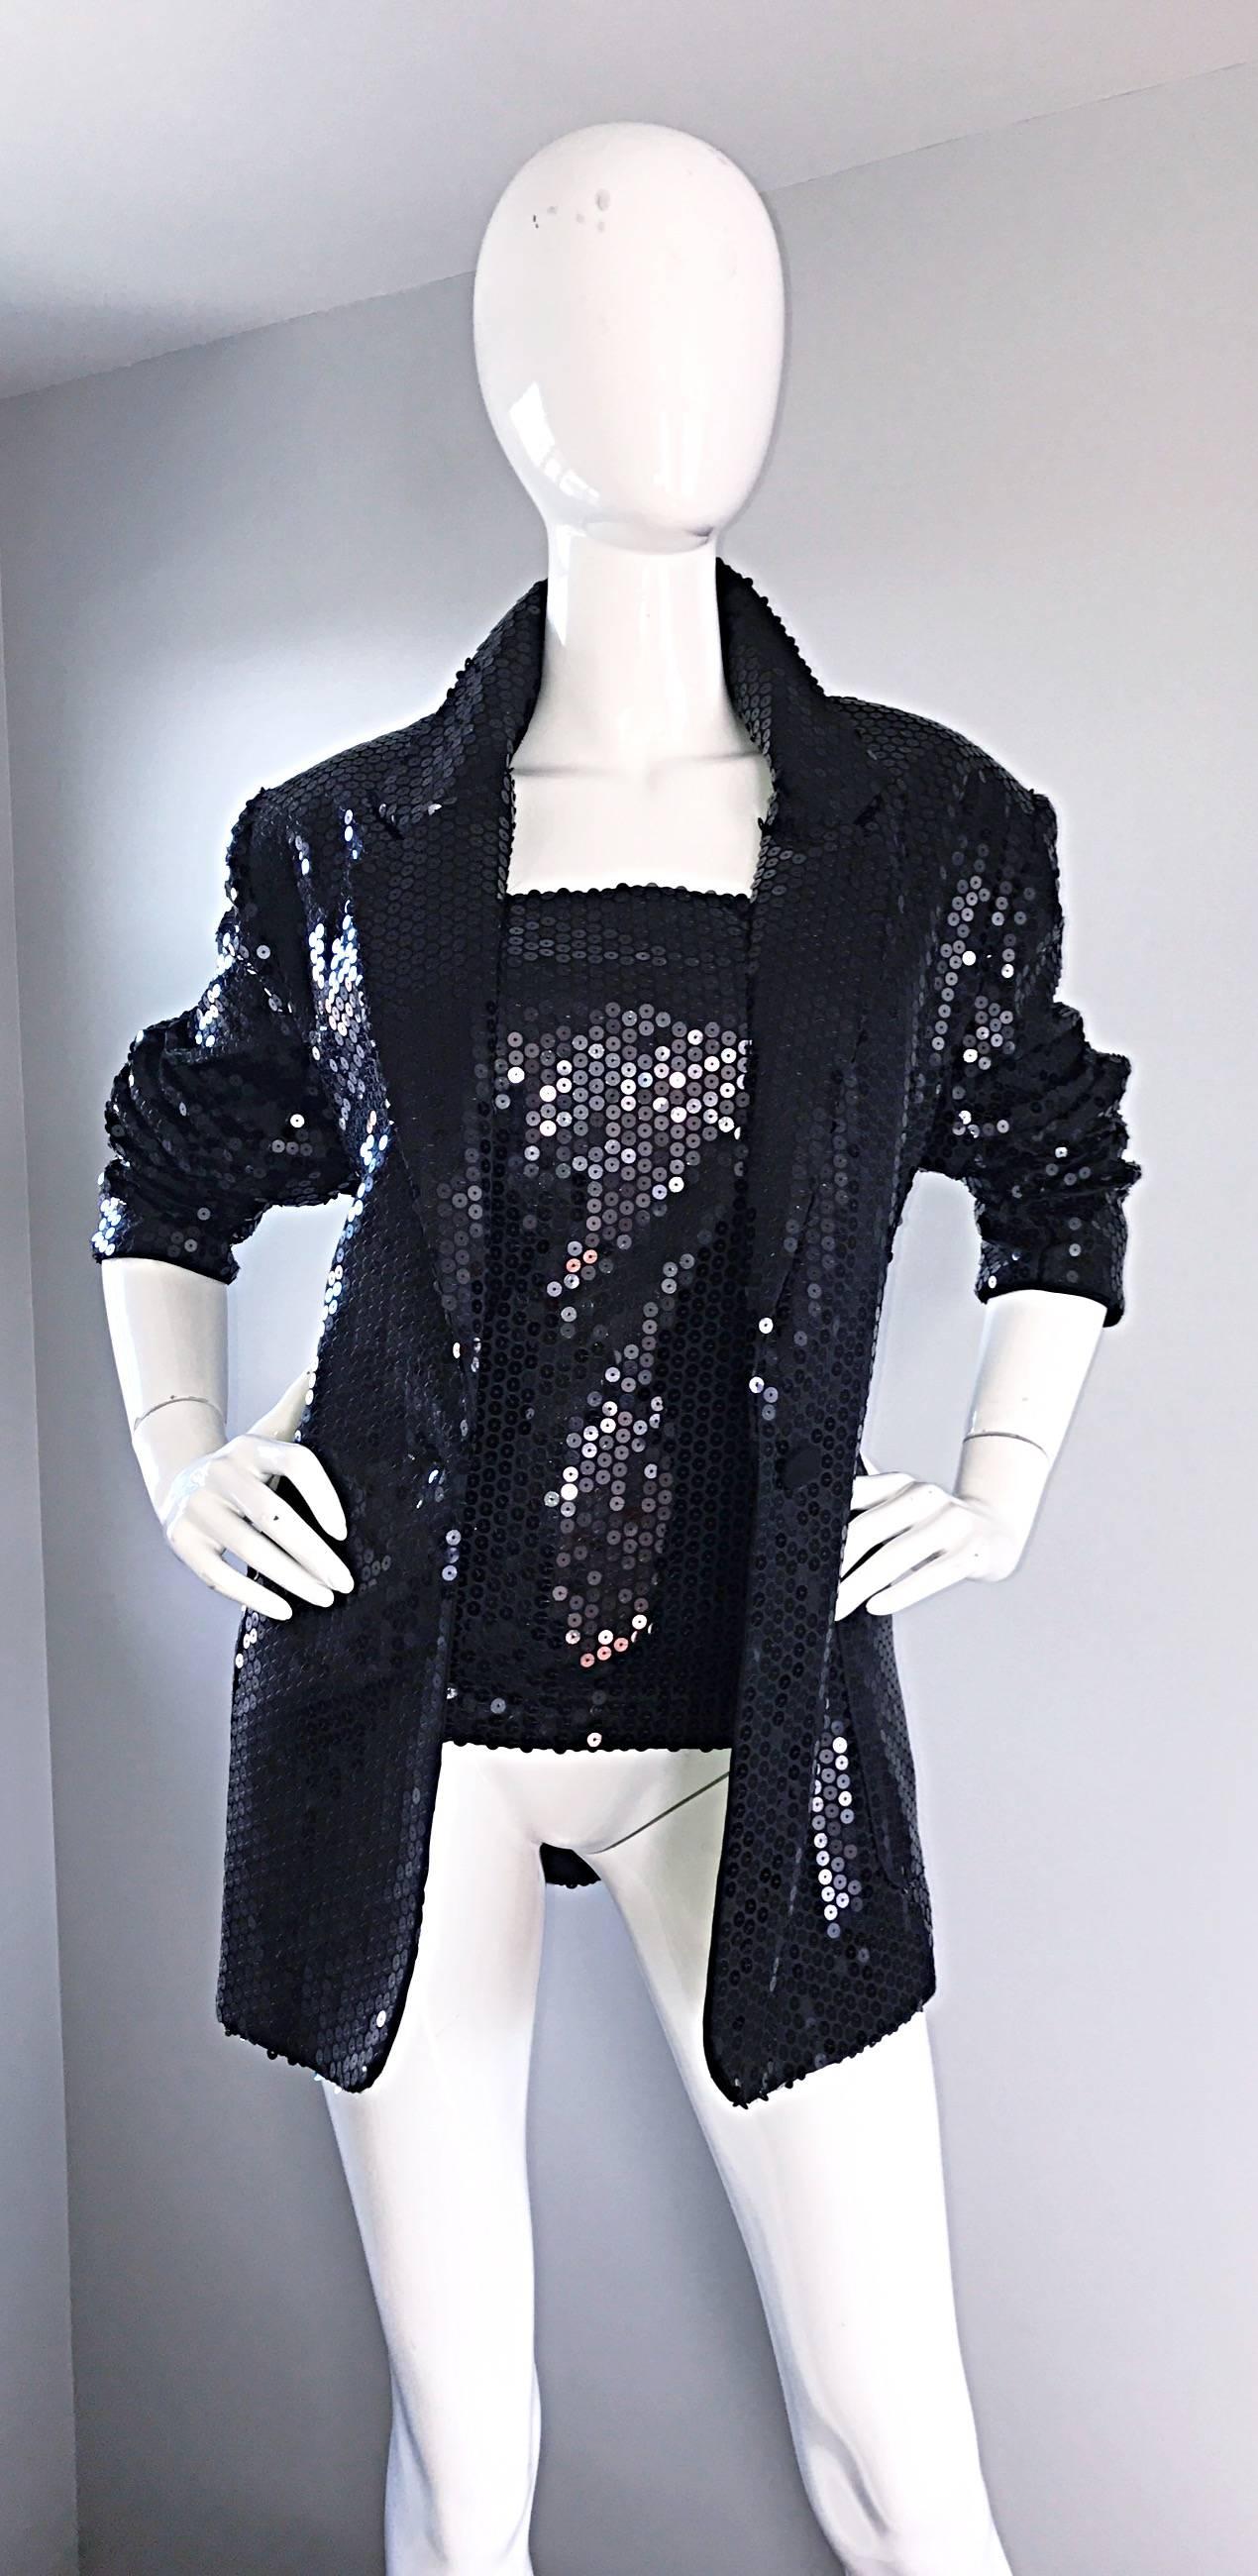 Beautiful vintage NICOLE MILLER 90s black sequin sleeveless top and blazer set! Features thousands of hand-sewn black sequins throughout both pieces. Single button at the front of the jacket. Two pockets (one at each side of the waist). Both pieces